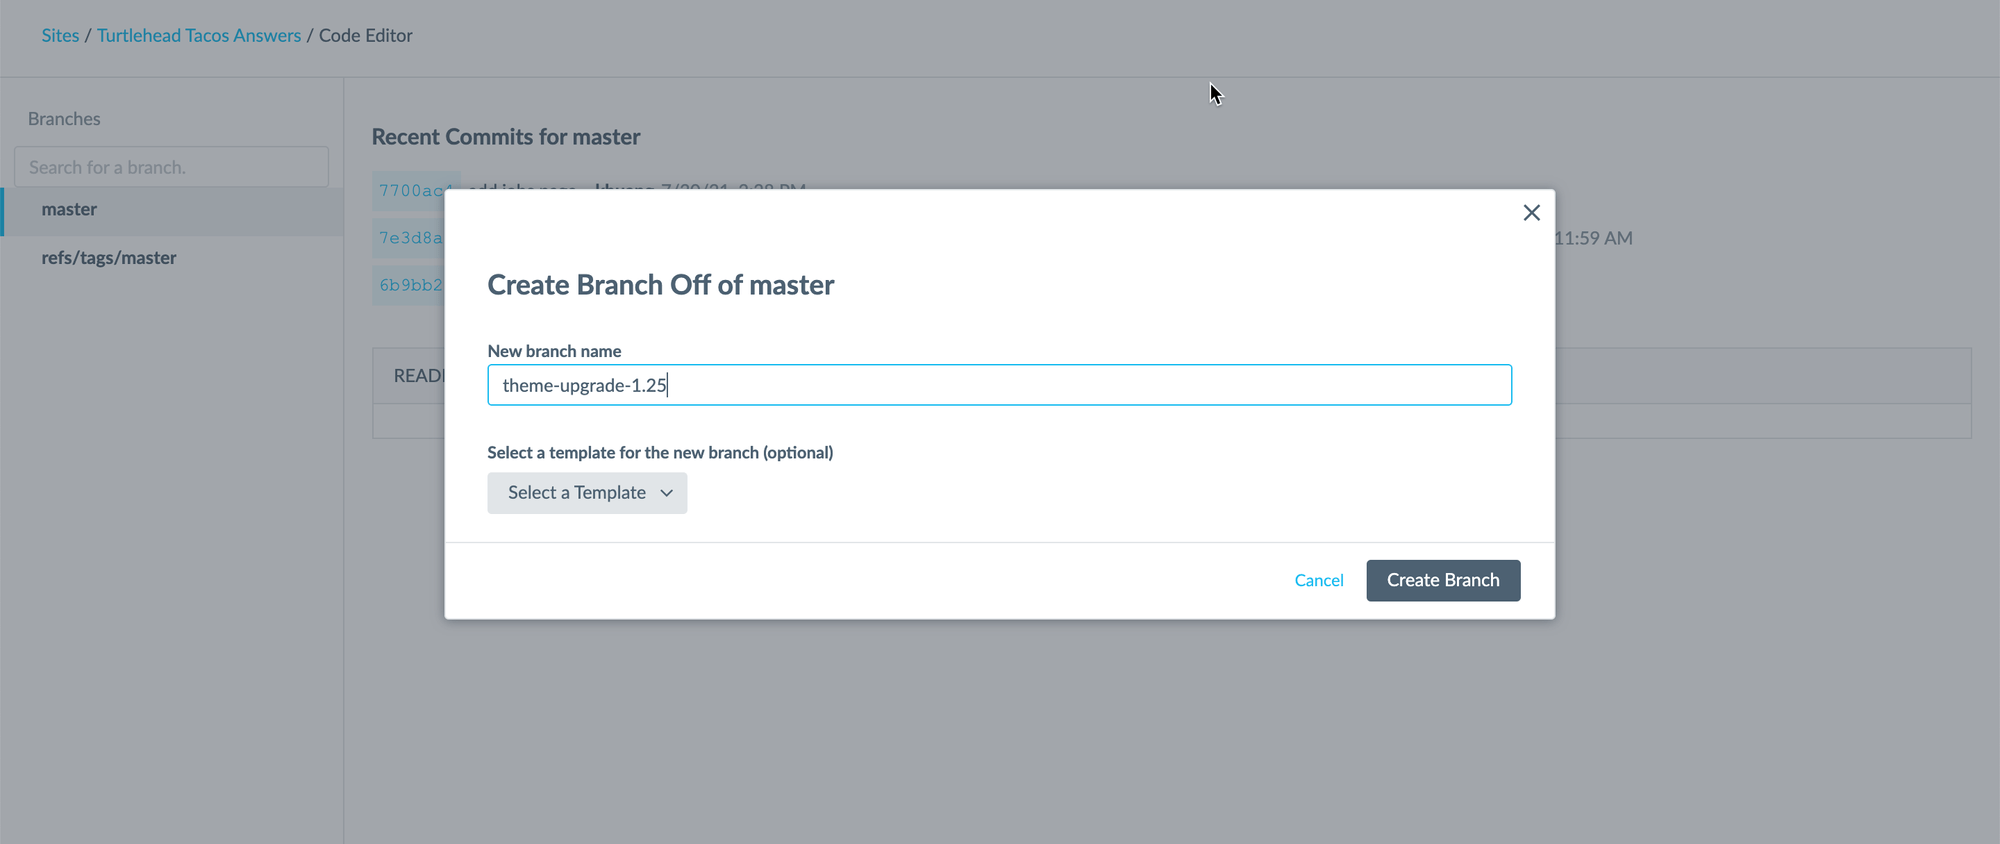 Create branch pop-up with box for New branch name filled in